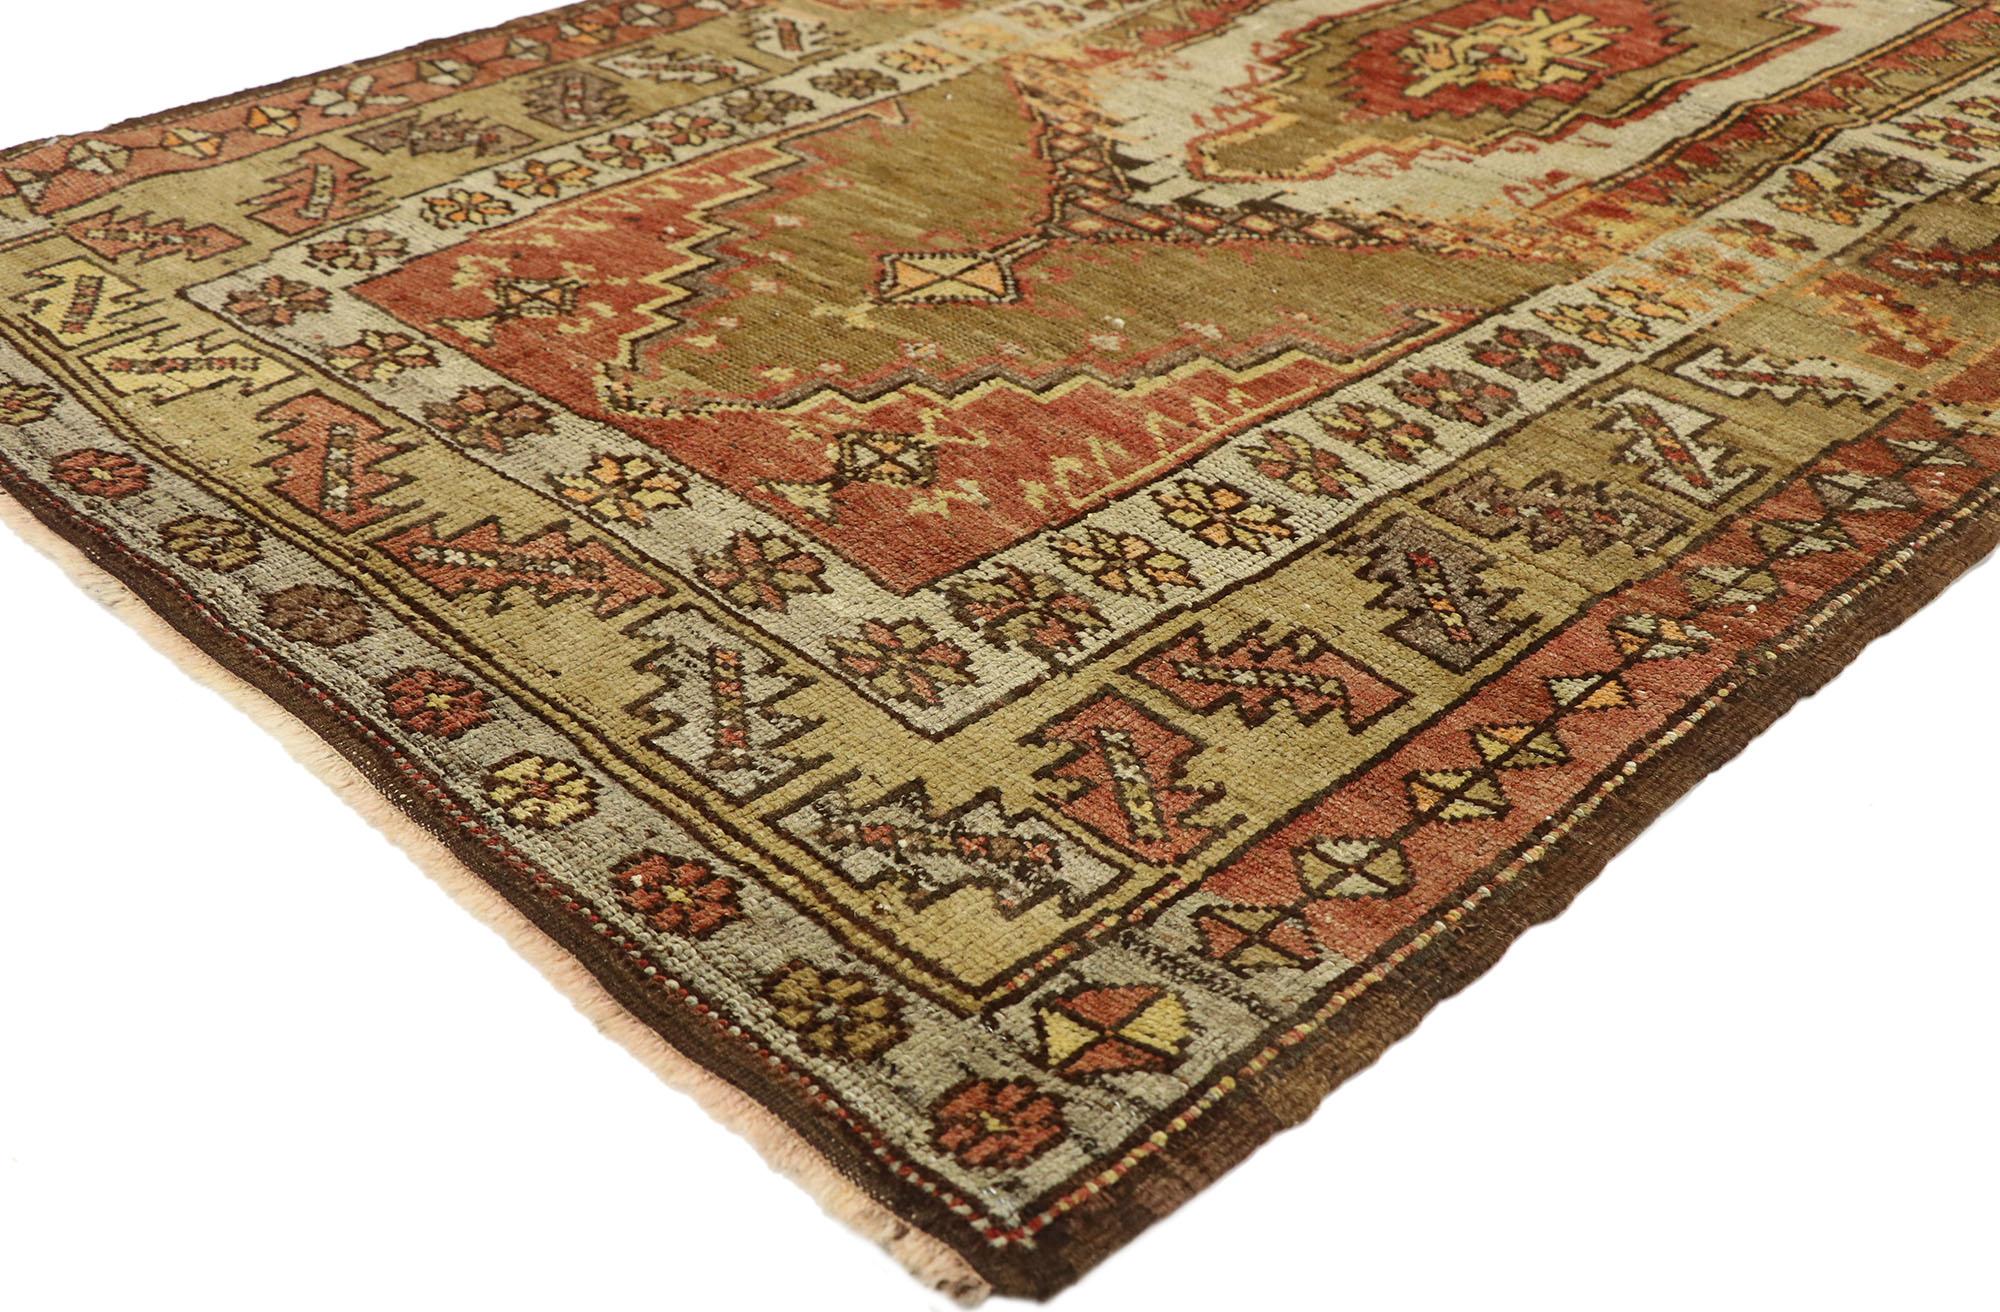 73601 Vintage Turkish Oushak Rug, 03'07 x 06'08. In this enchanting hand-knotted wool vintage Turkish Oushak rug, a mesmerizing tale unfolds with every thread and motif. At its heart lies a concentric elongated medallion, delicately adorned with